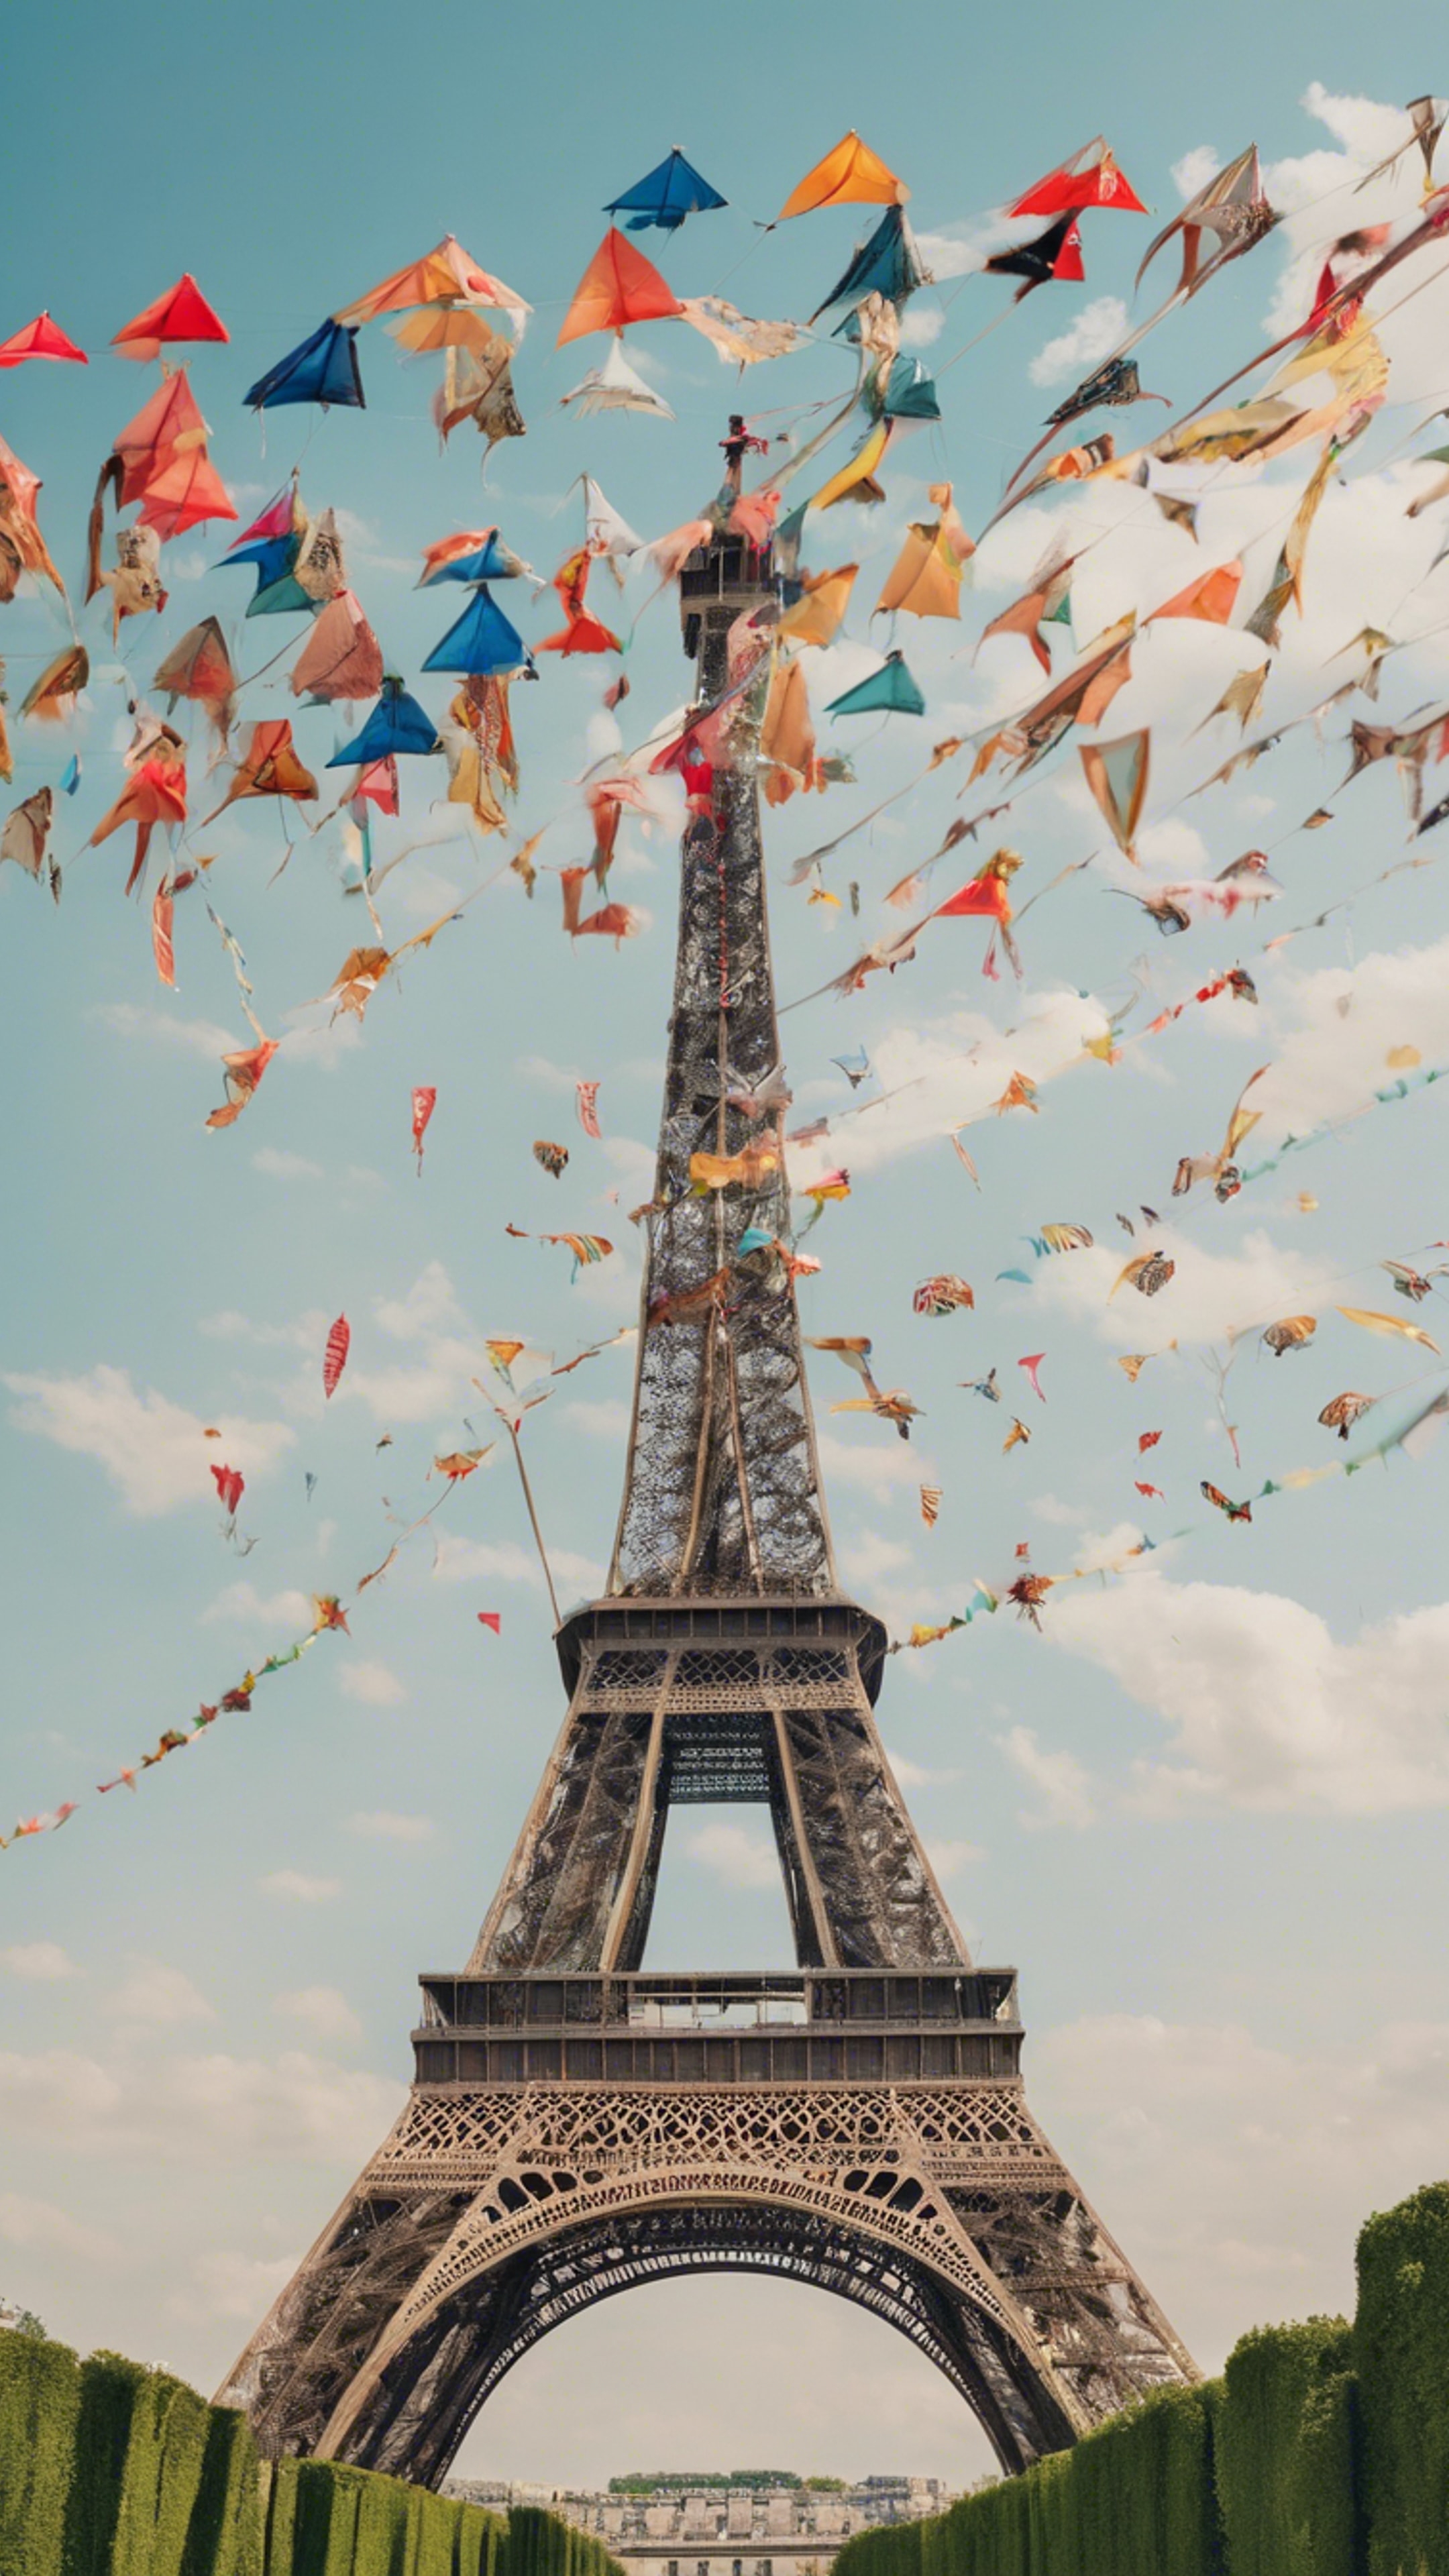 Numerous colorful kites flying around the Eiffel Tower on a breezy summer day. Tapeta[13c5a5af918a46f7995e]